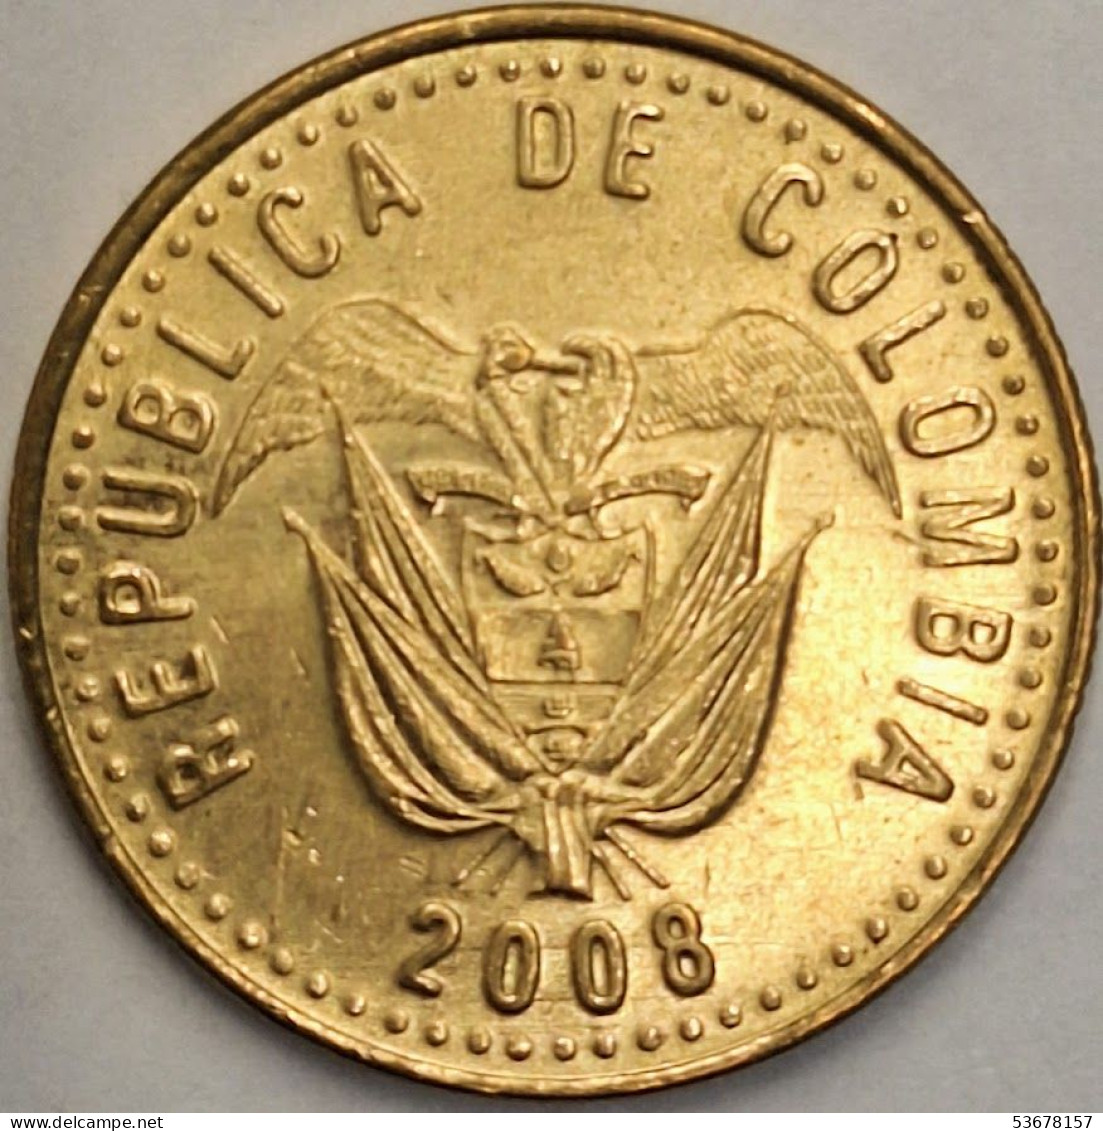 Colombia - 100 Pesos 2008, KM# 285.2 (#3501) - Colombia